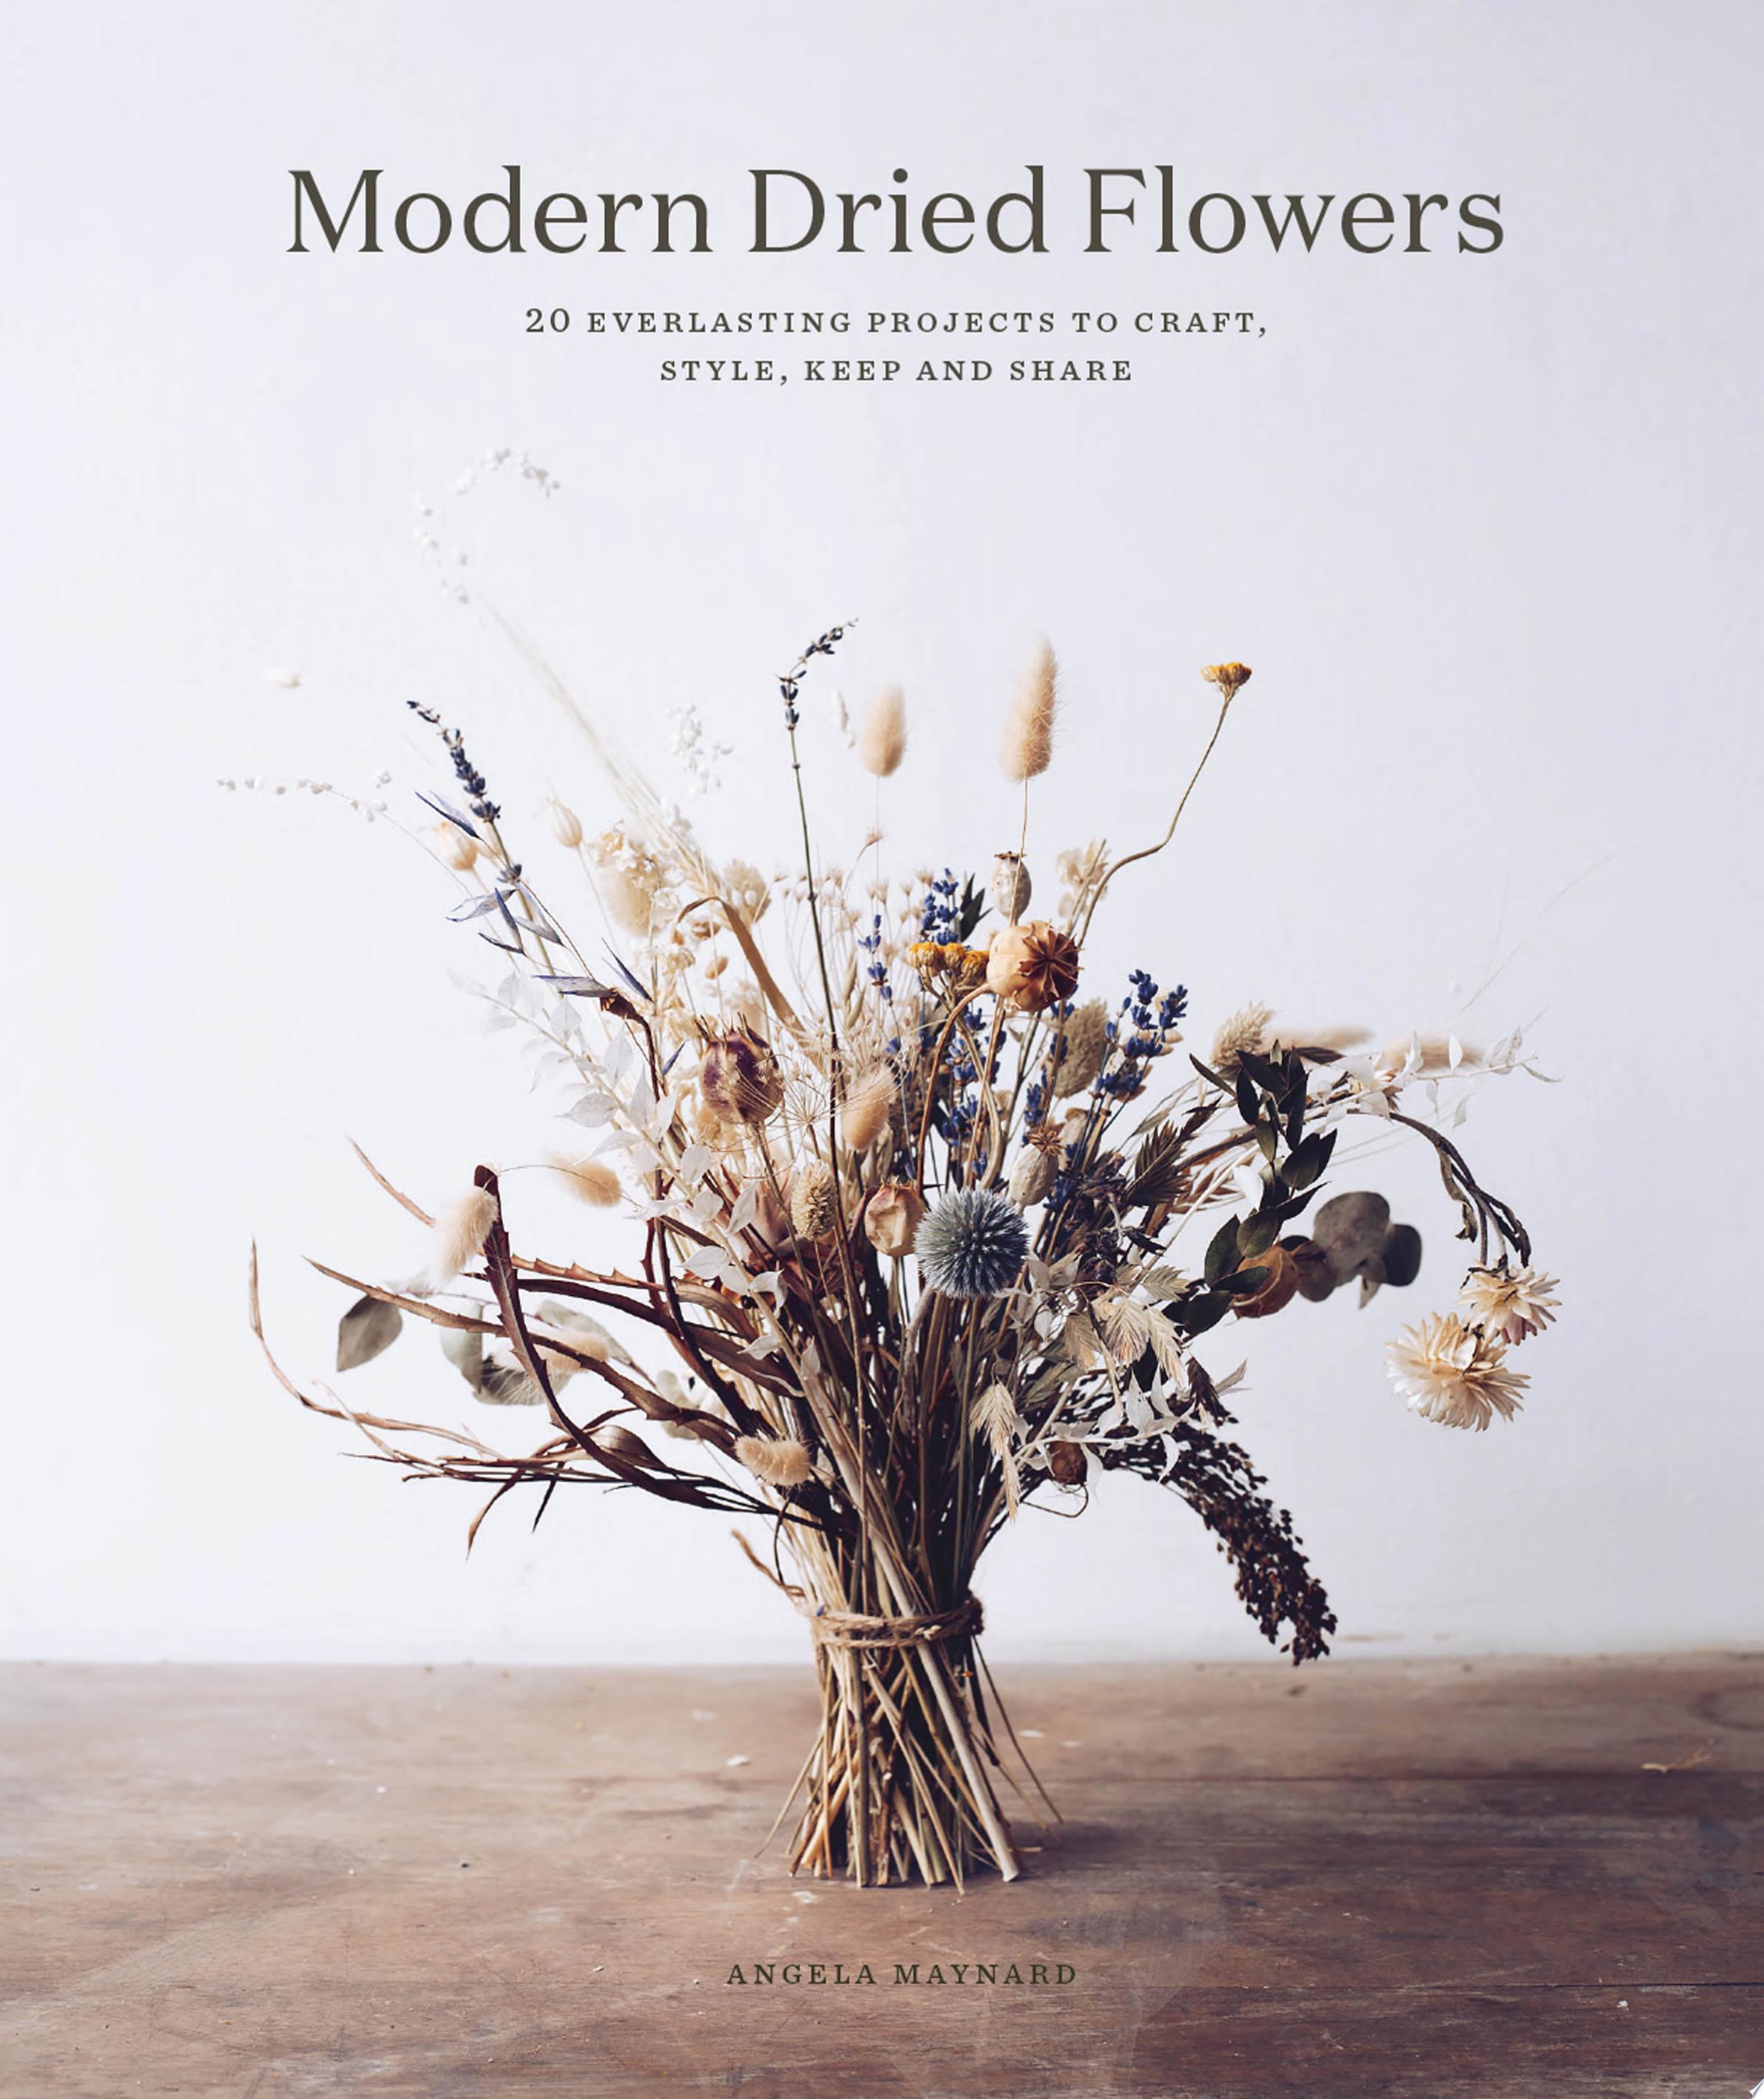 Image for "Modern Dried Flowers"